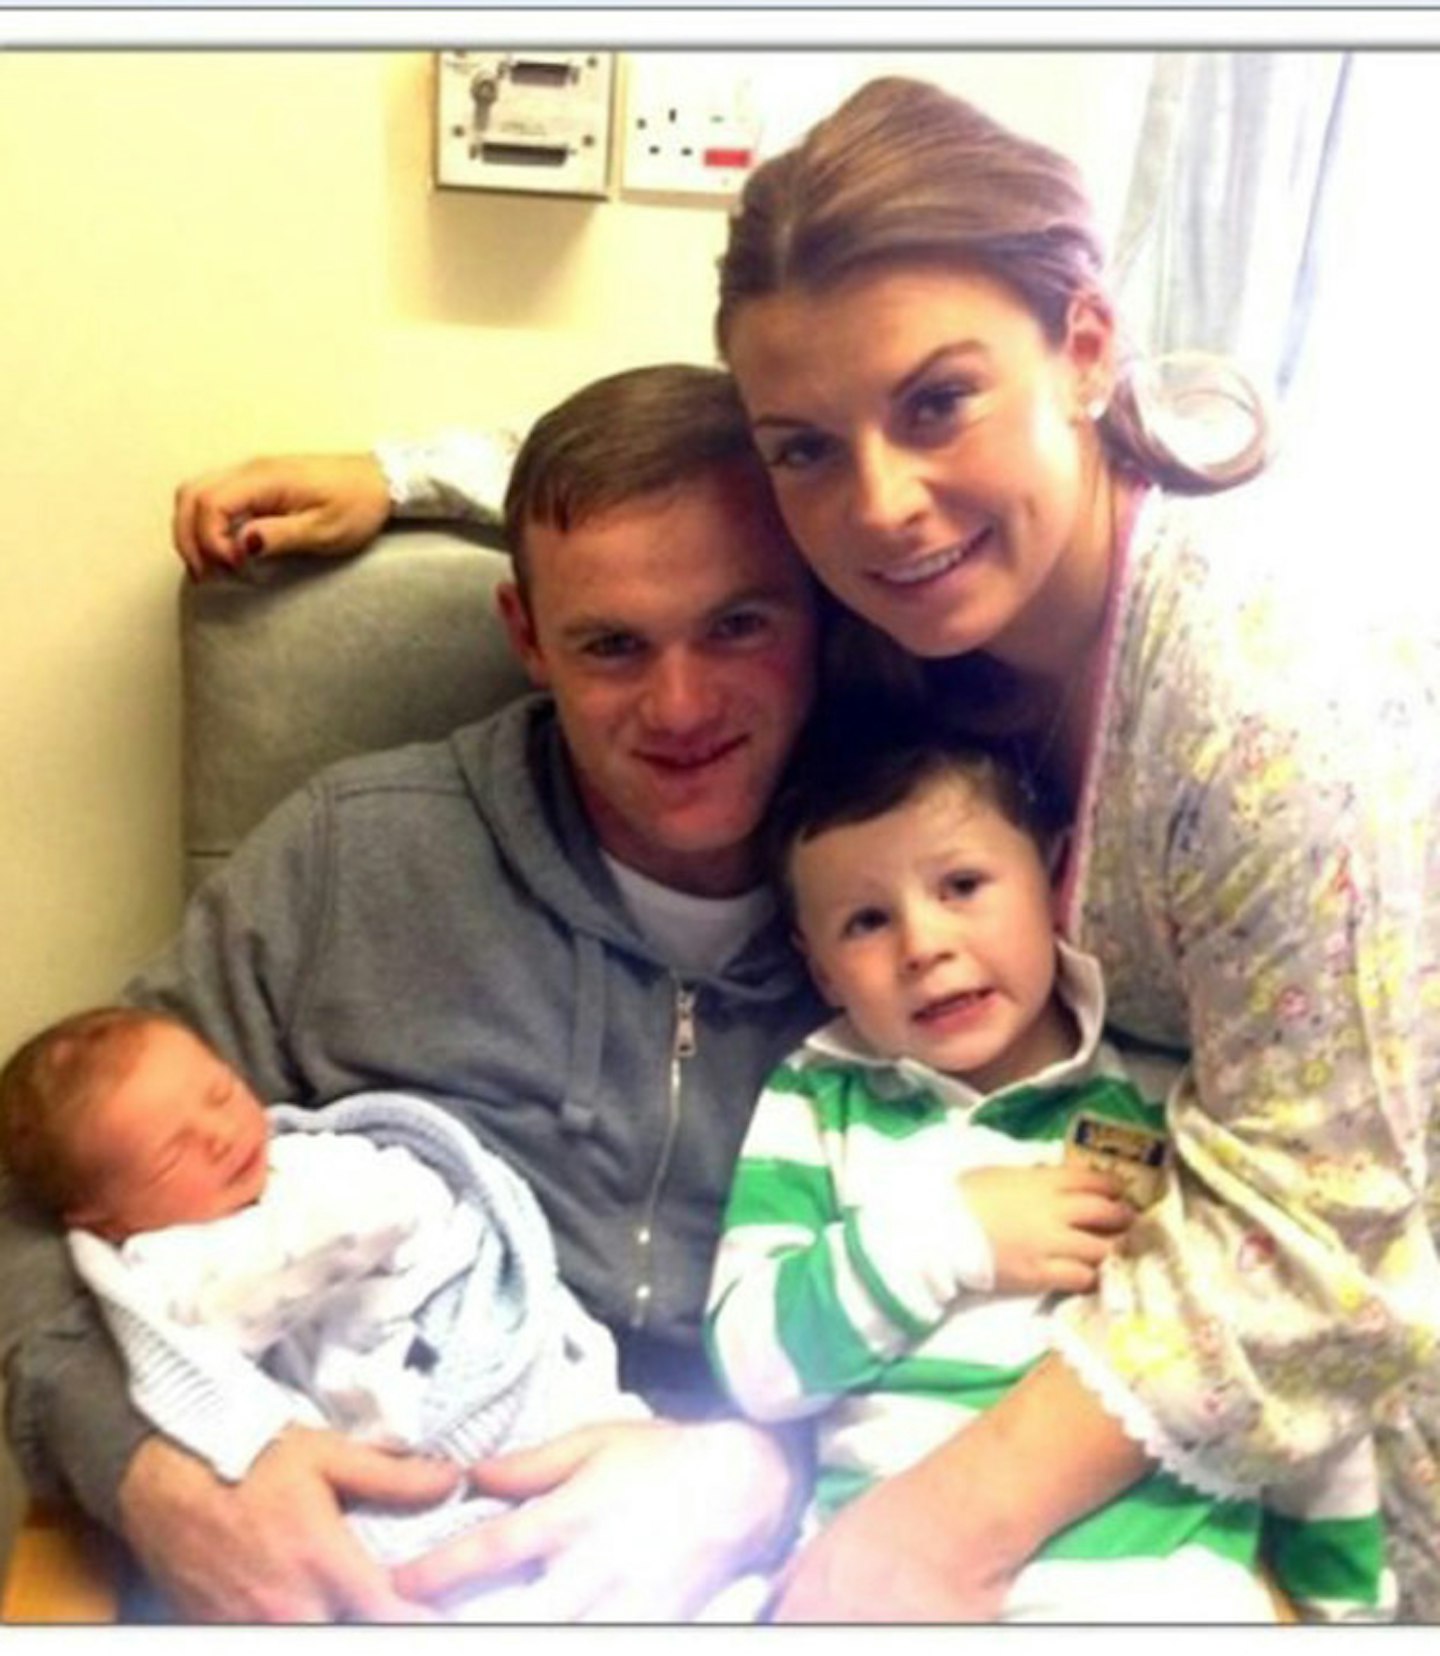 Wayne and Coleen Rooney welcomed their second son Klay on 21 May 2013